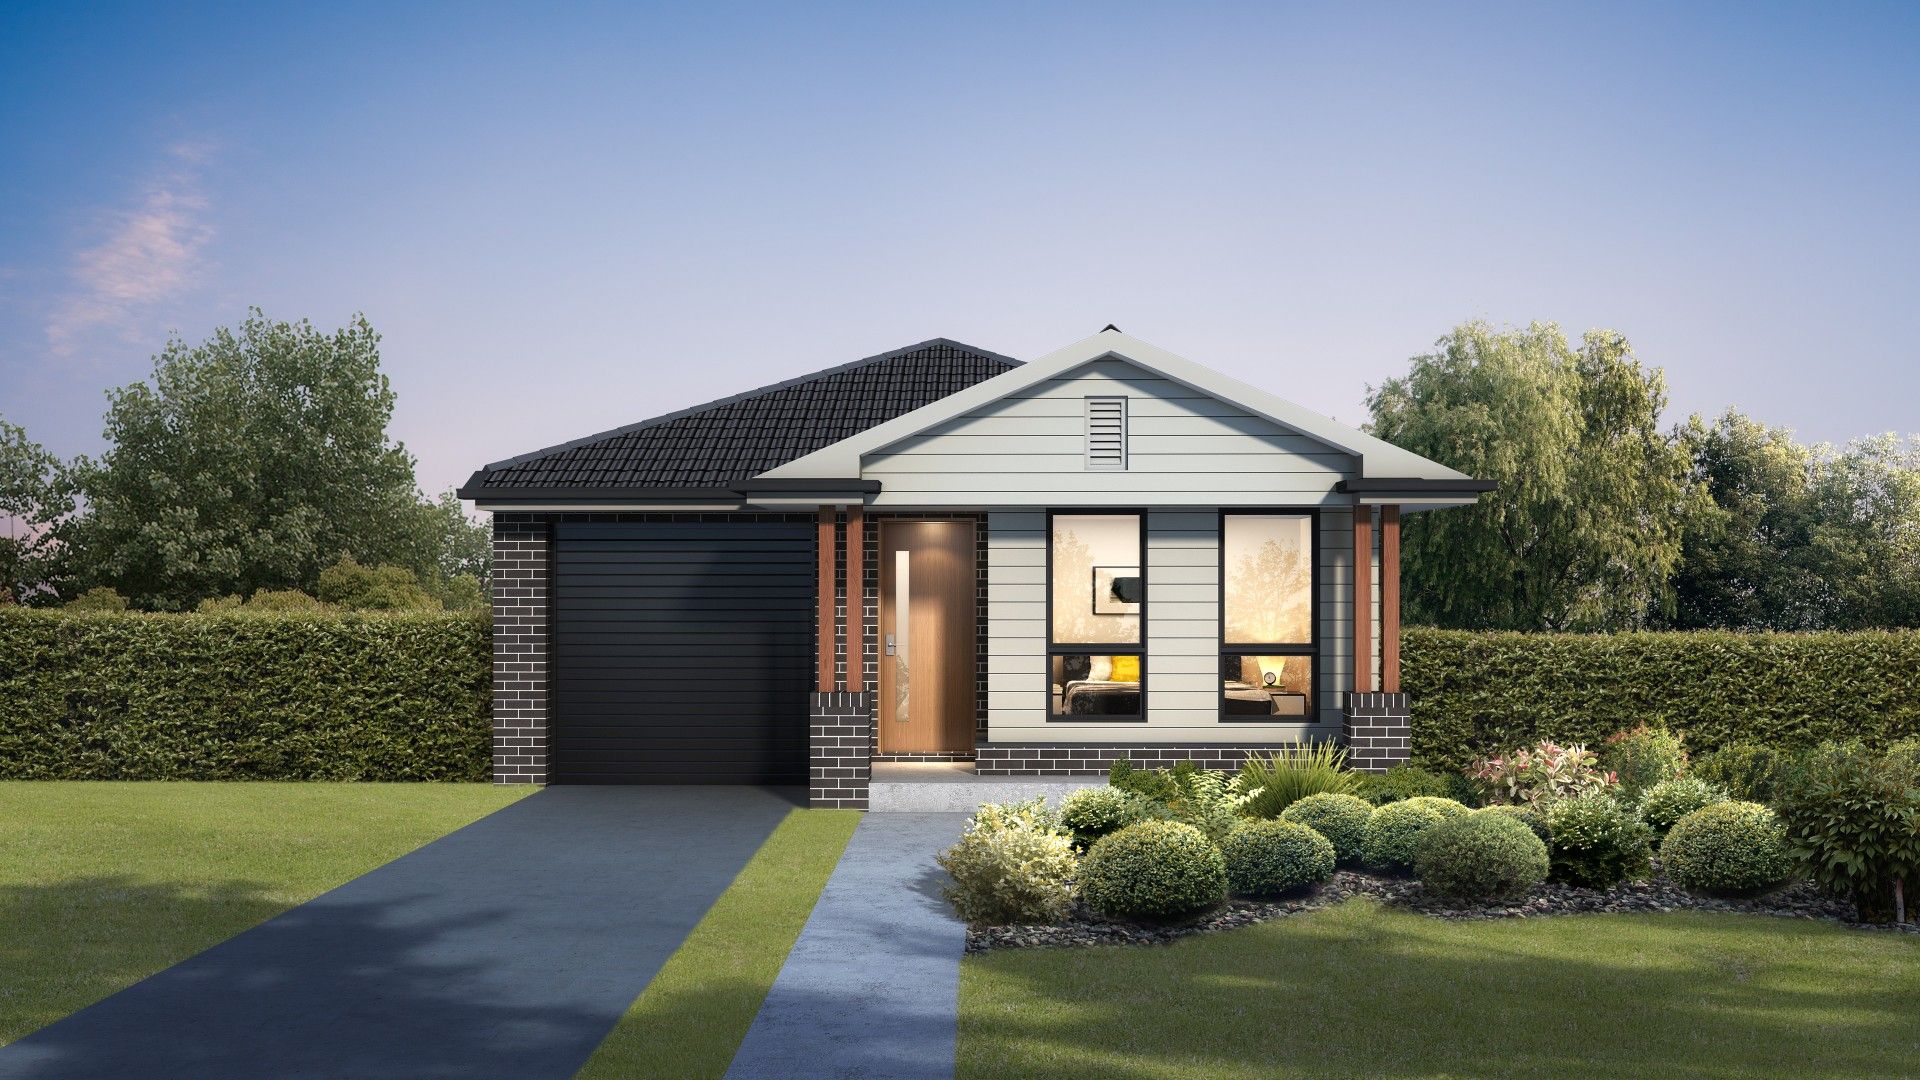 3 bedrooms New House & Land in Lot 10 Proposed Road BOX HILL NSW, 2765